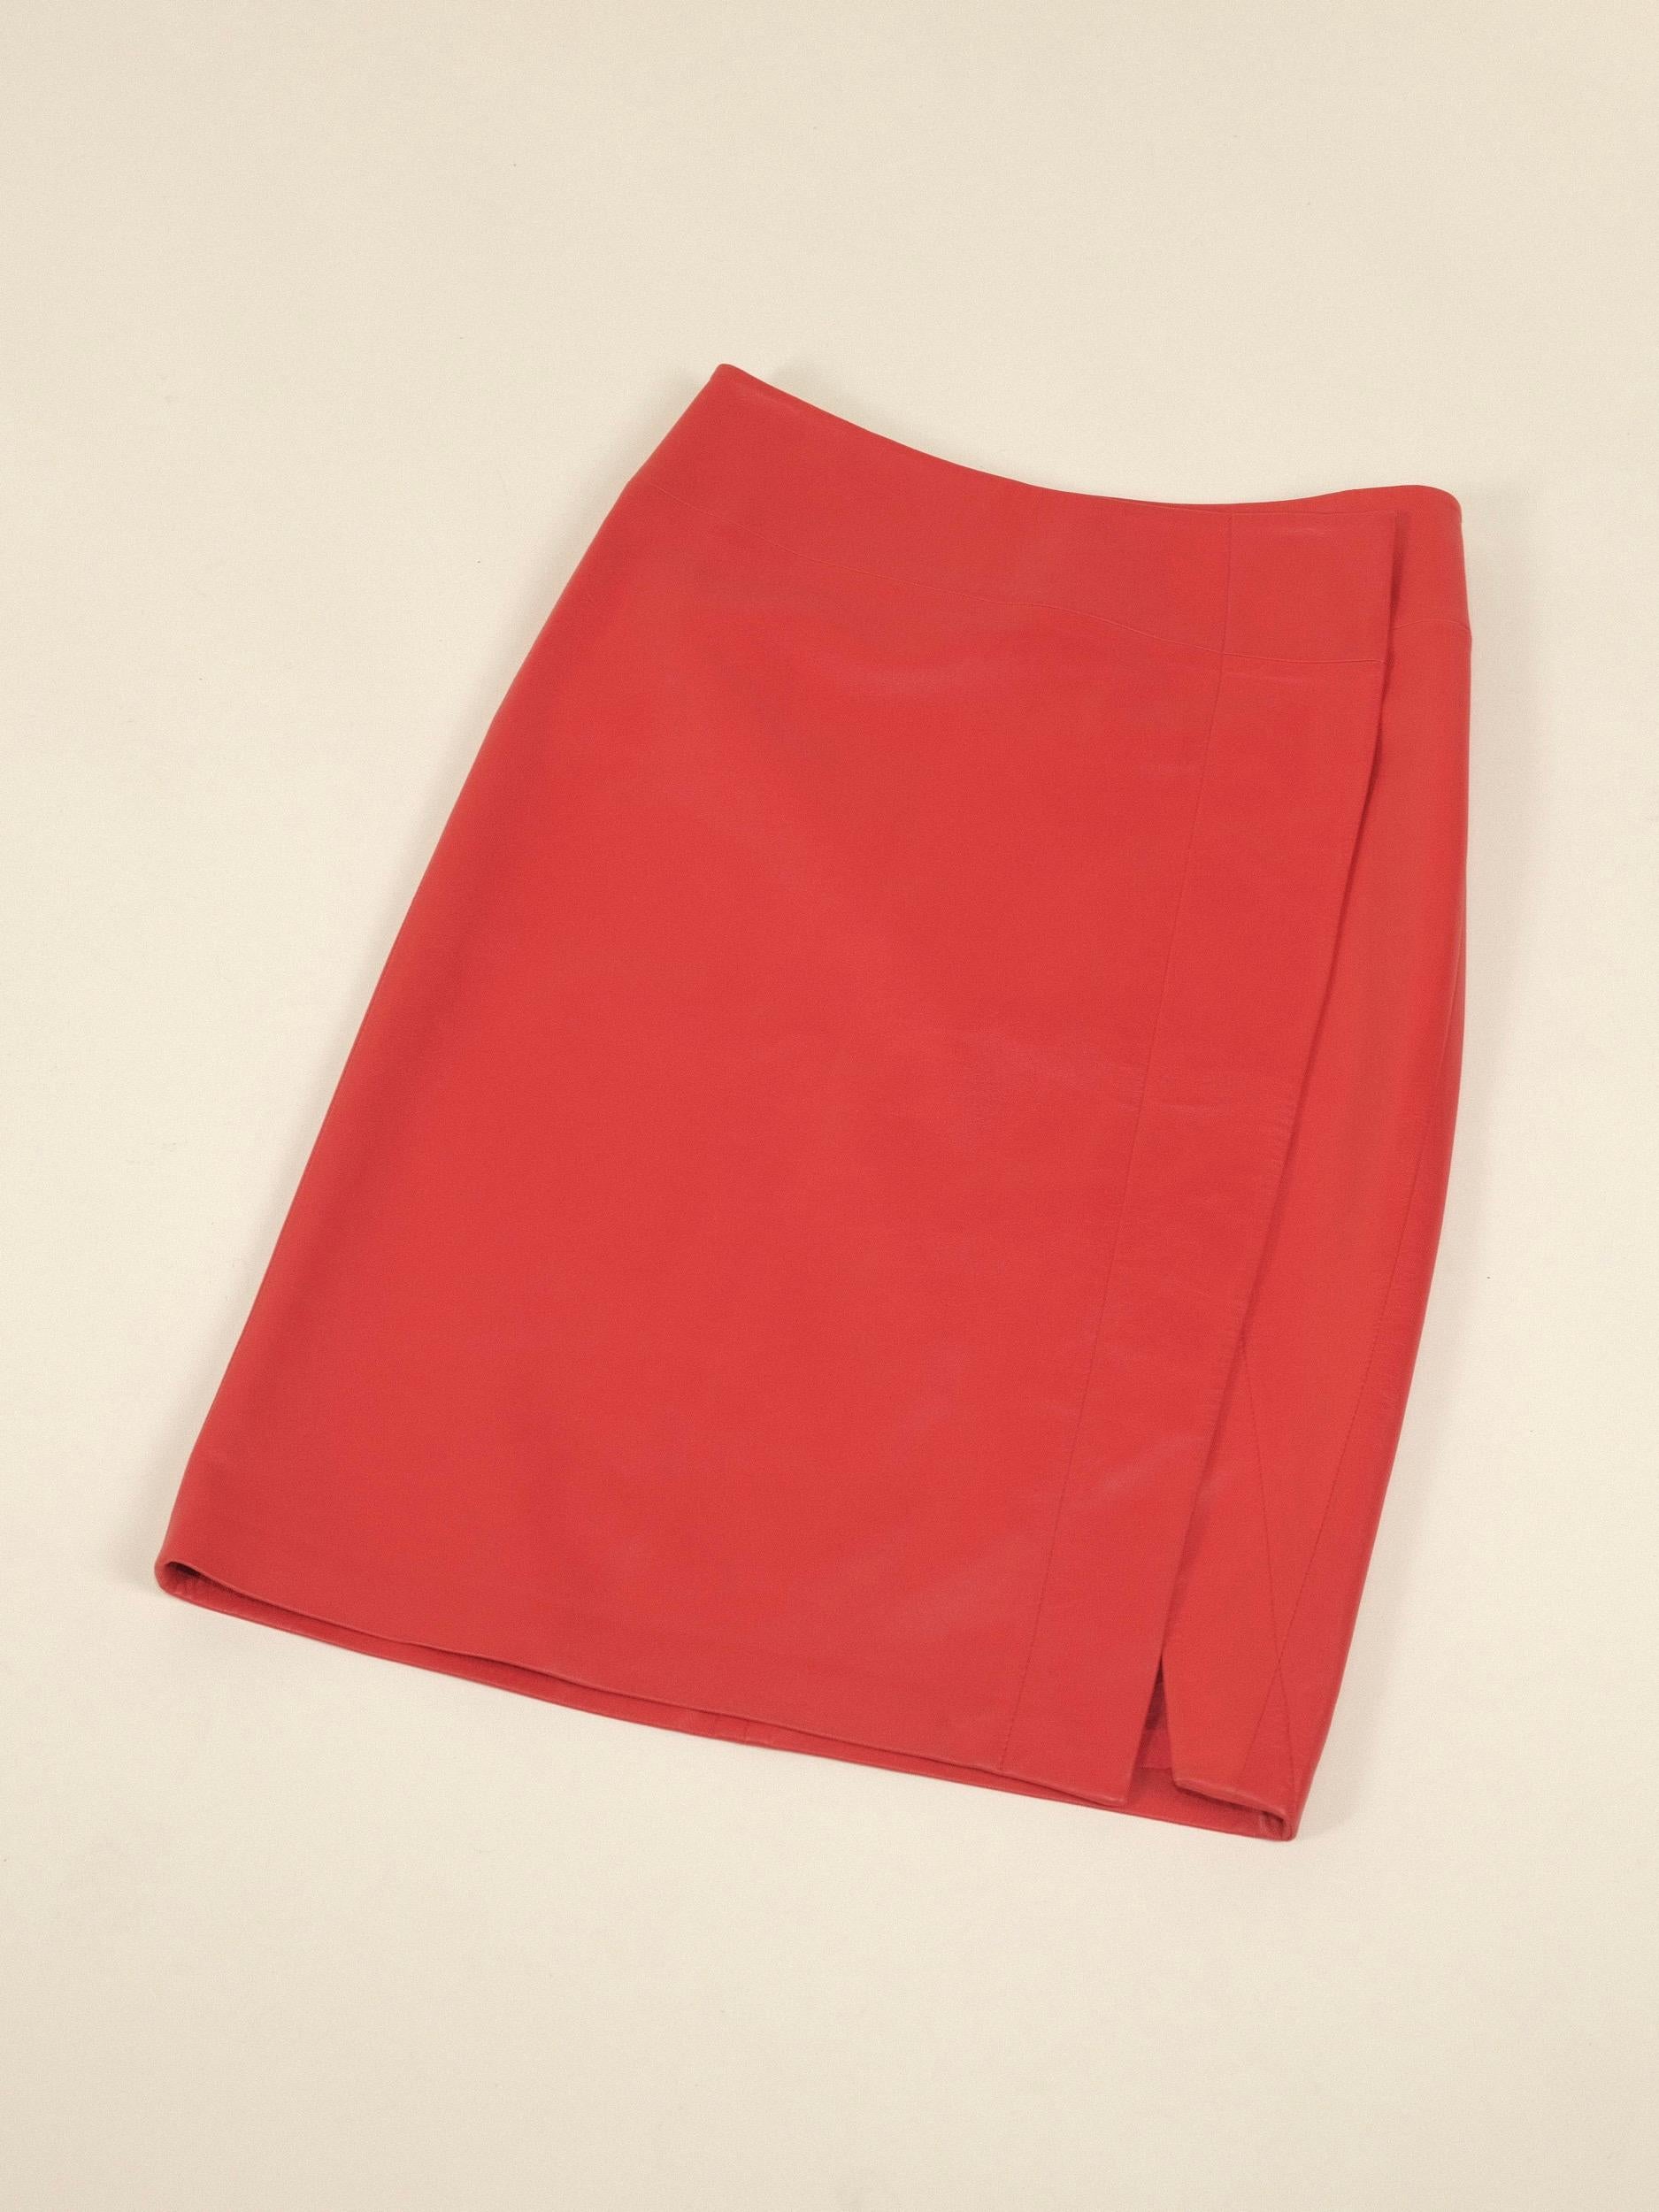 Donna Karan Leather Wrap Skirt Tomato Red Size US4 IT40 FR38 1990's For Sale 5